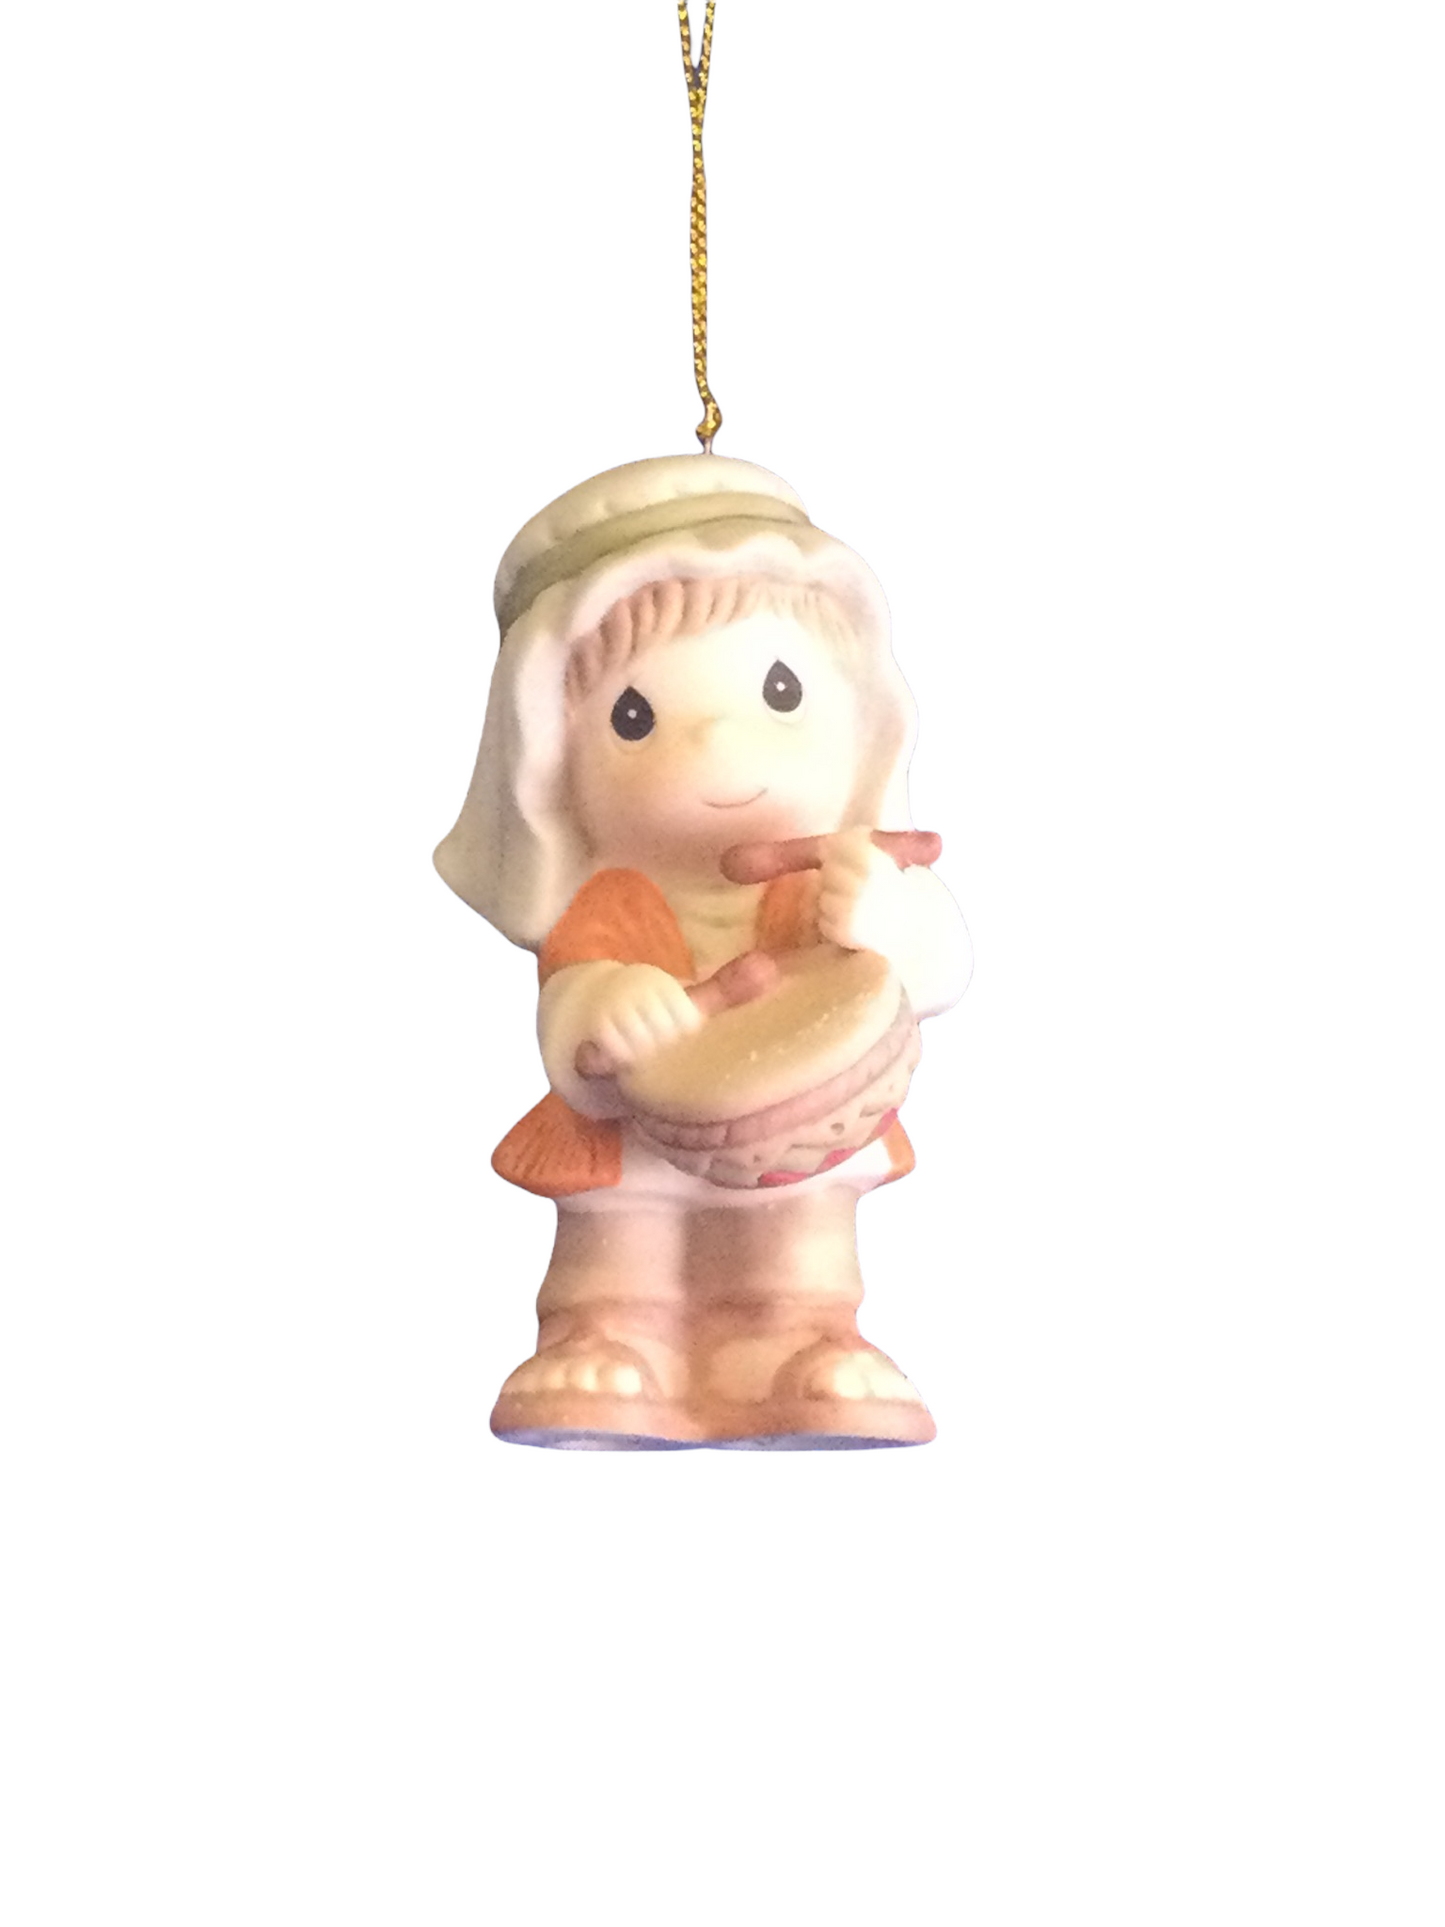 My Gift For Him - Precious Moment Ornament